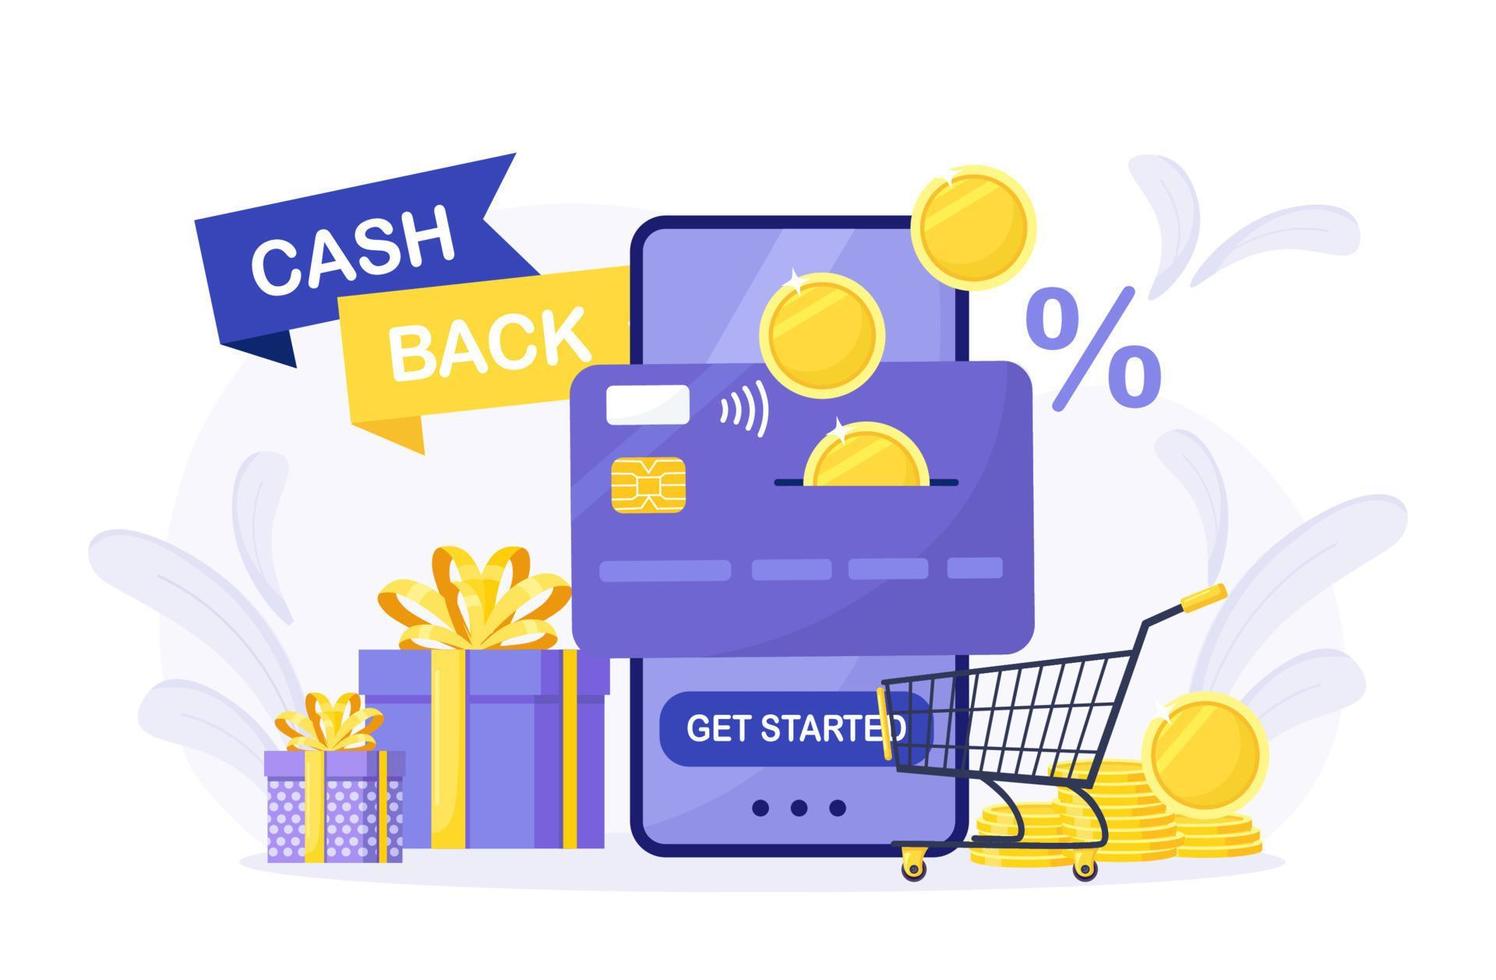 Cash back loyalty program, bonus. Pile of coins, credit card and mobile phone with button get started cashback. Saving money. Refund money service app on smartphone screen. Online banking vector